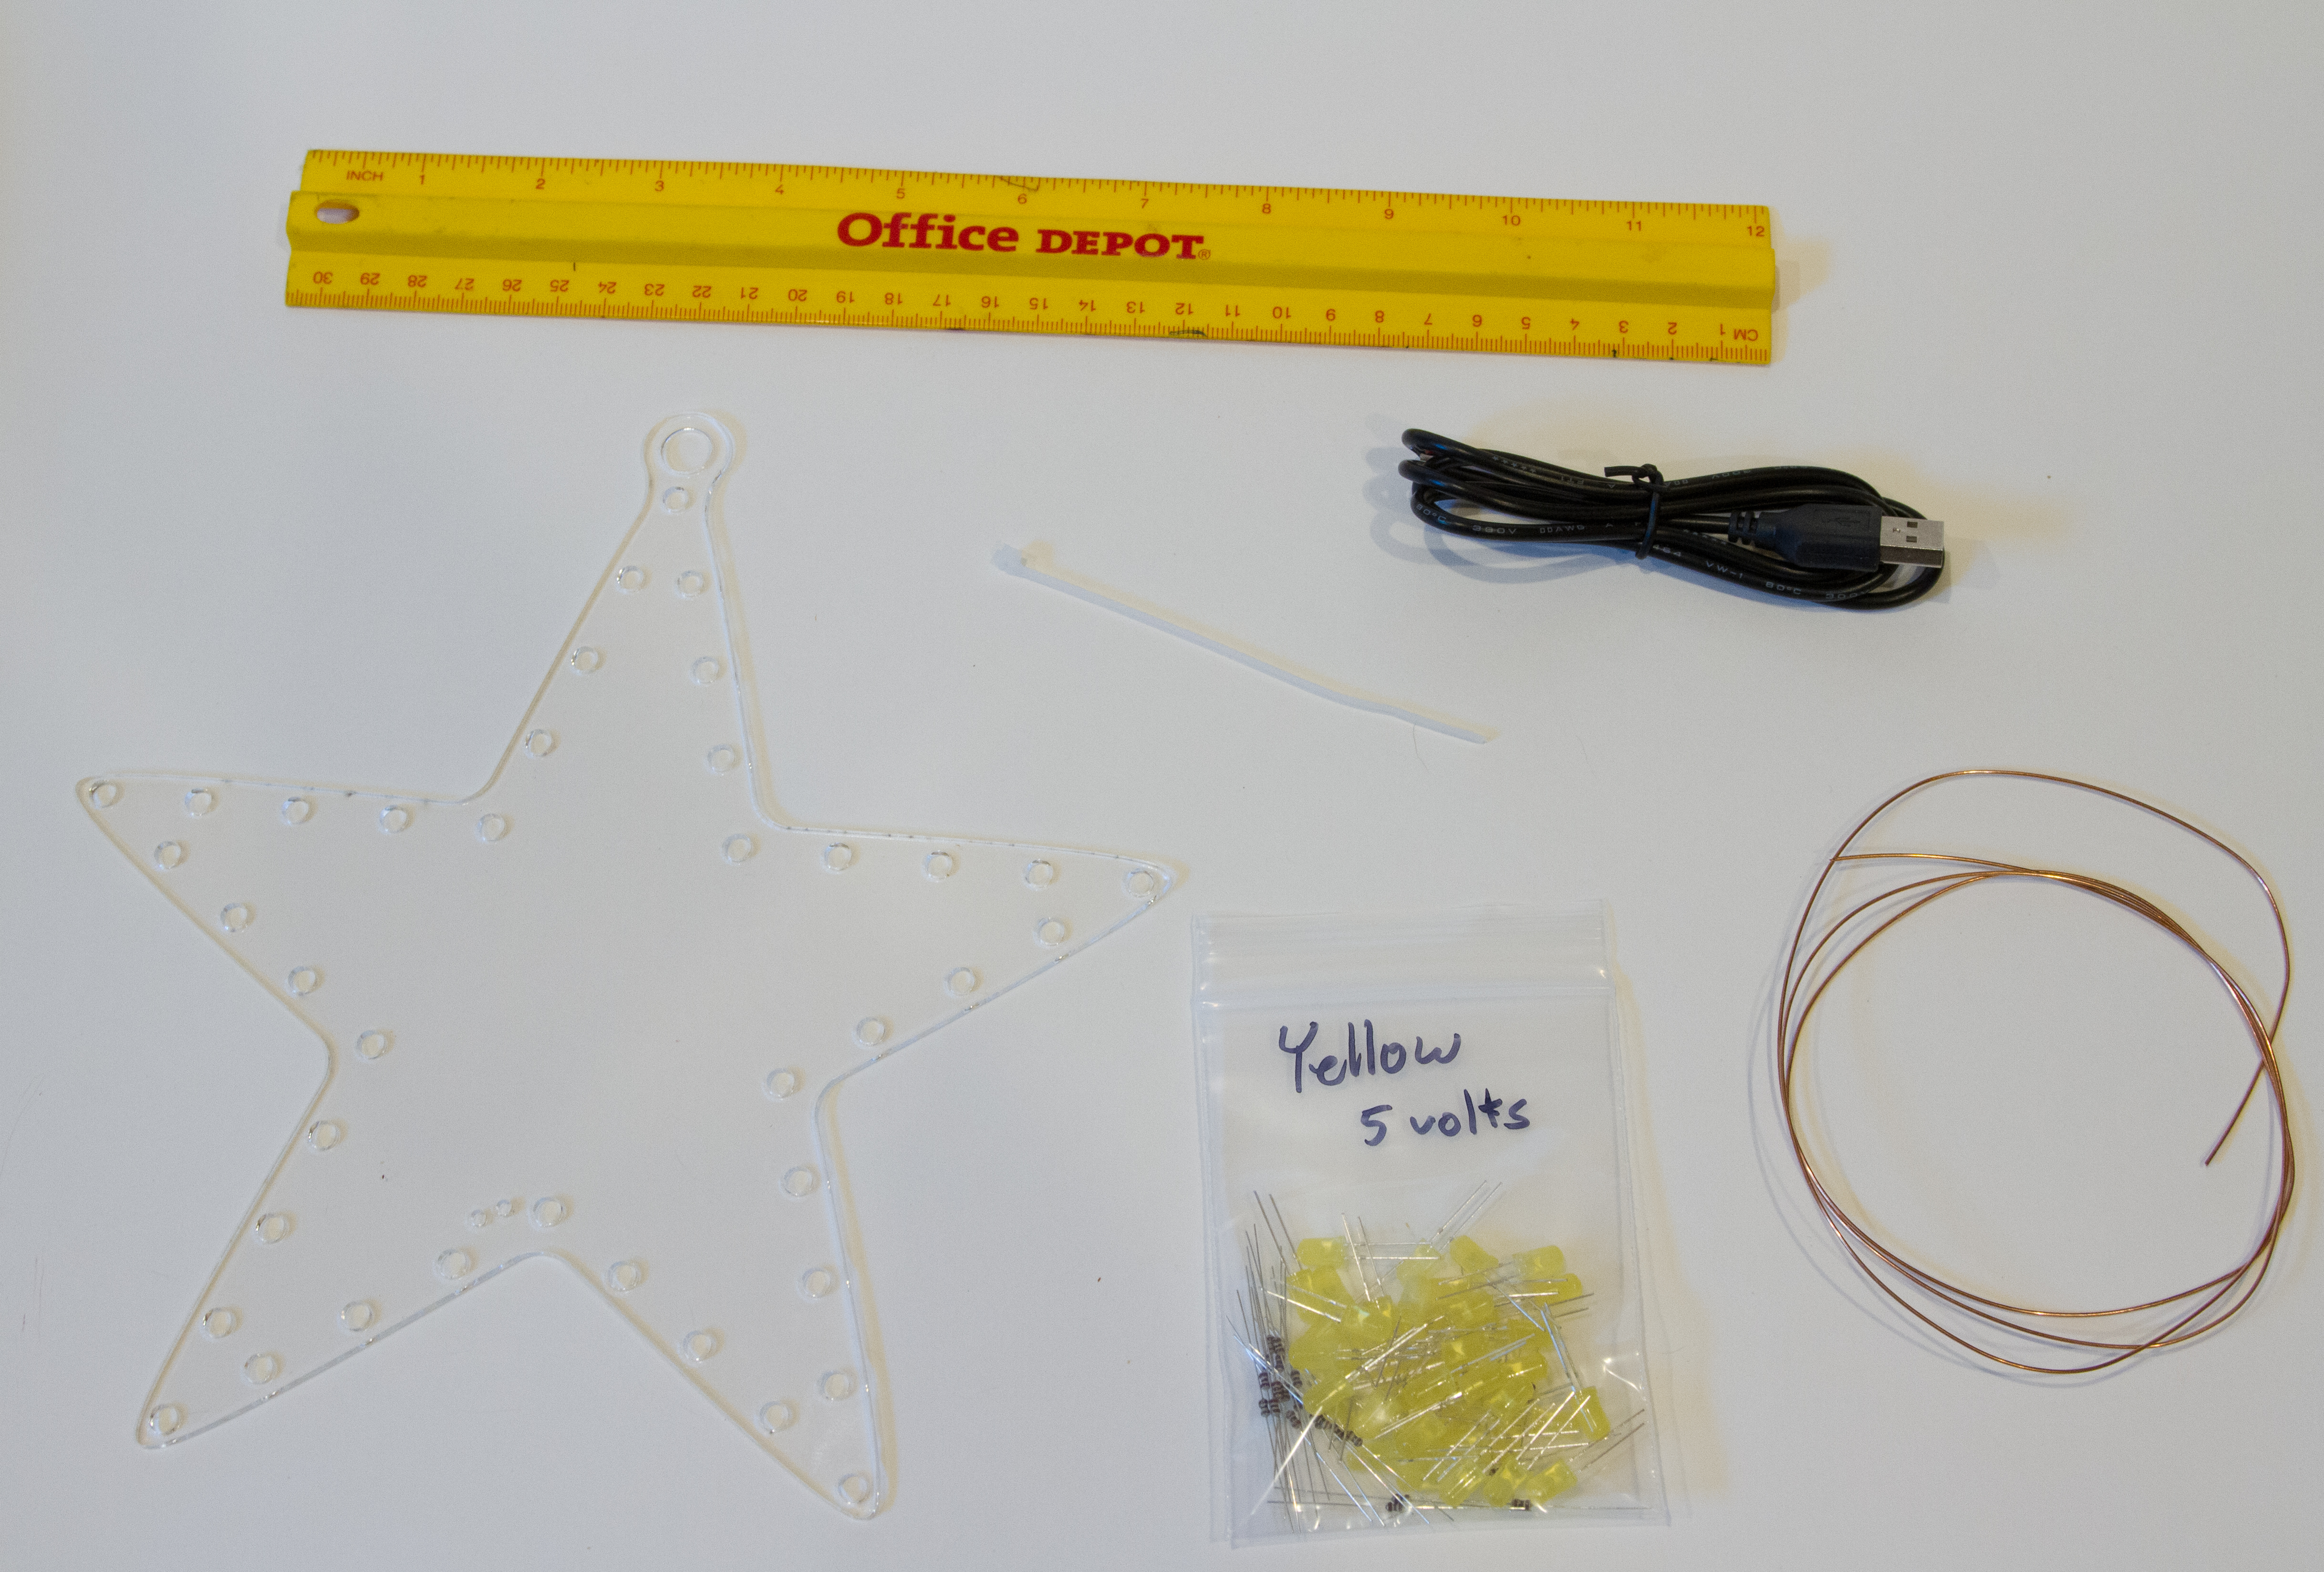 Yellow star kit contents